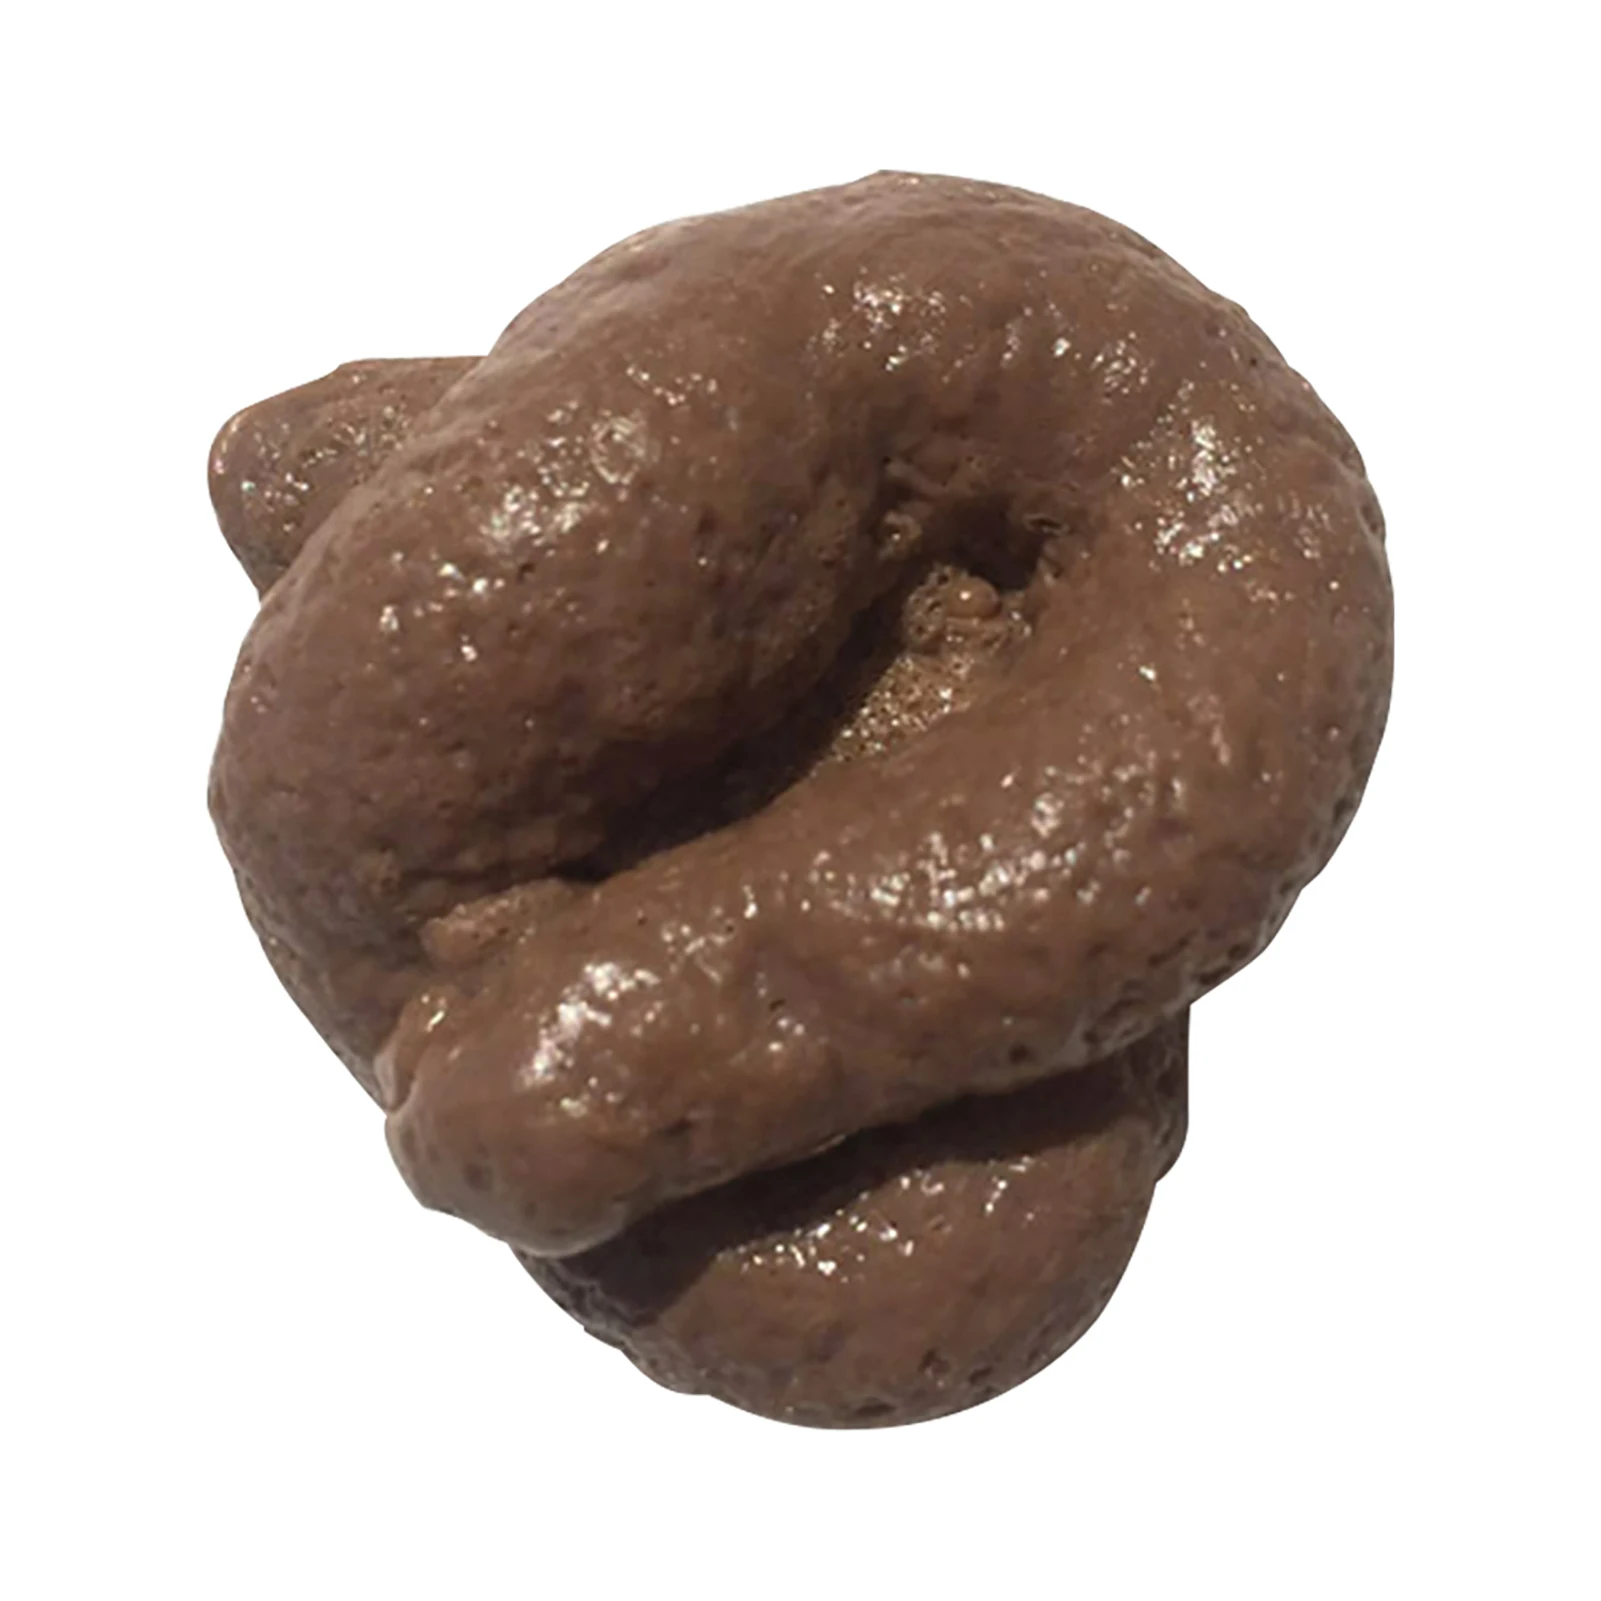 Simulation Stool Party April Fools Day Soft Realistic Funny Toy Small Fake Poop Halloween Practical Joke TPR Home School Gift